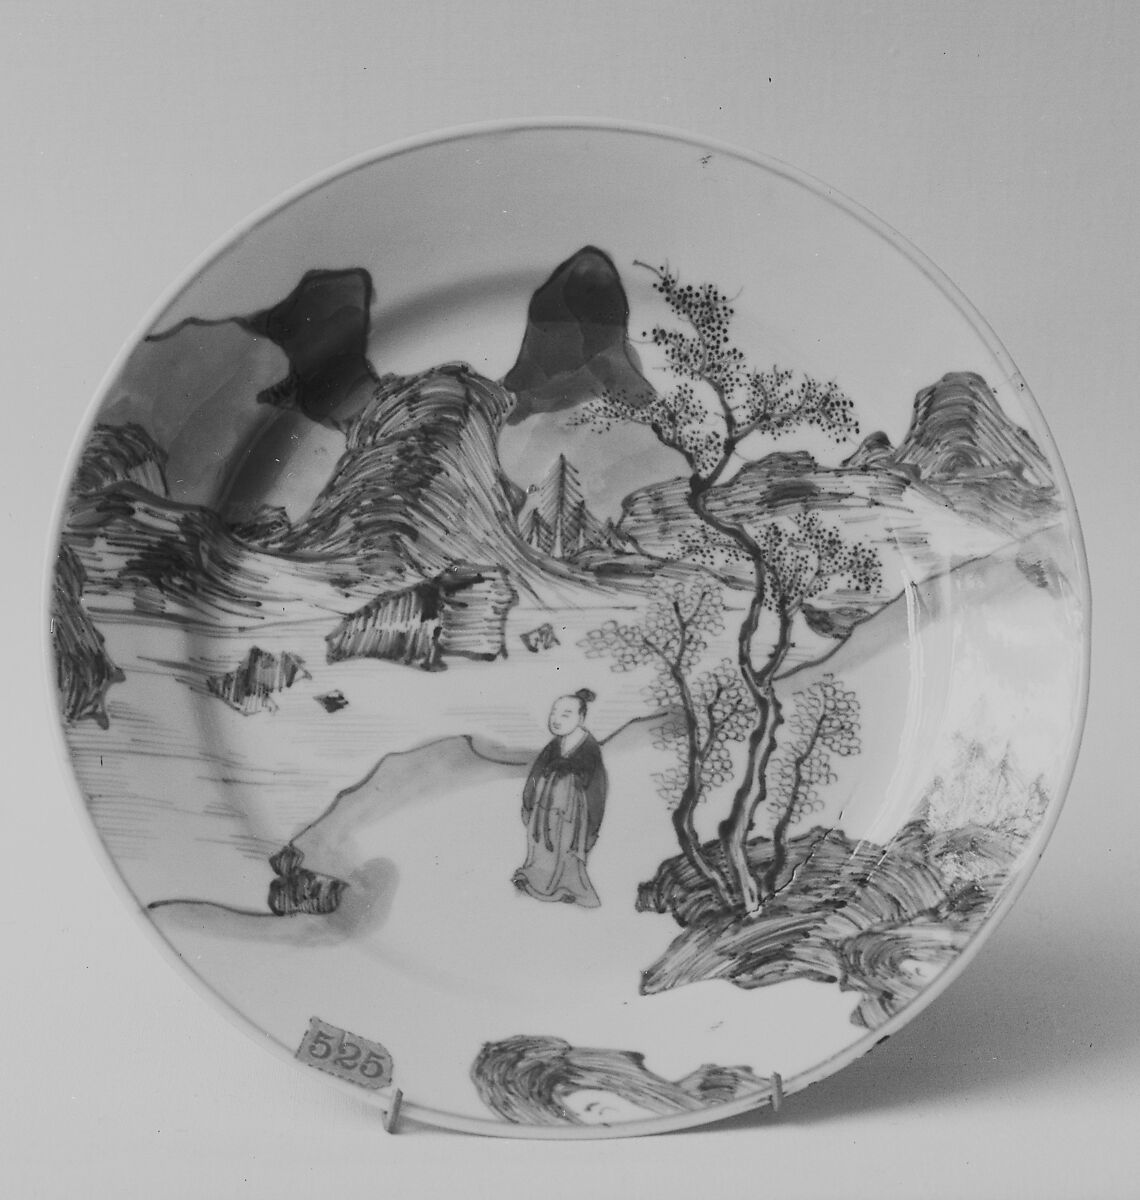 Dish with Scholar in a Landscape, Porcelain painted with cobalt blue under a clear glaze (Jiangxi Province; Jingdezhen ware), China 